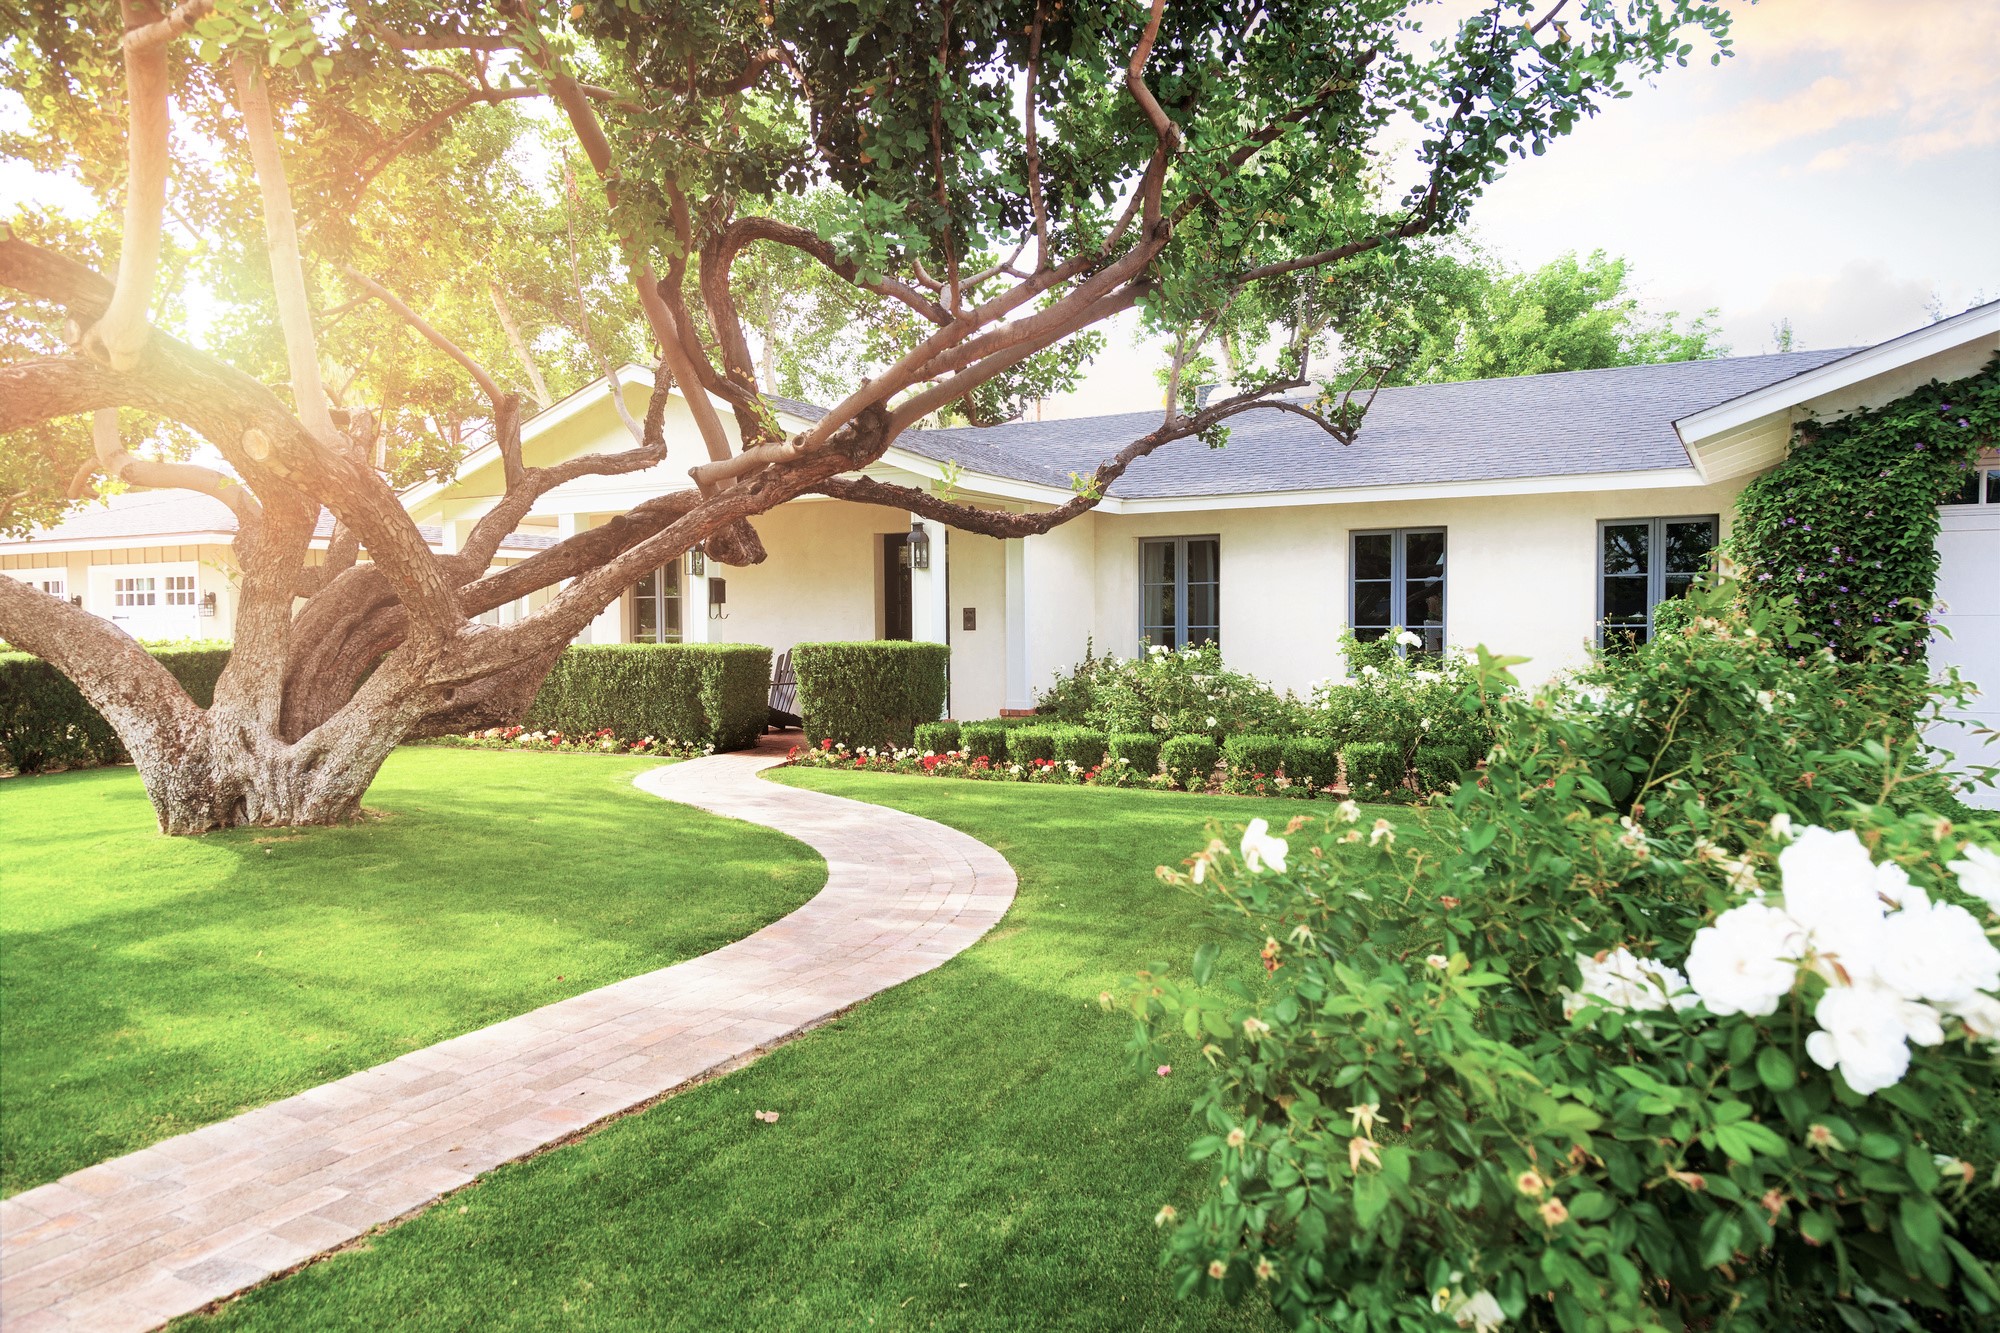 A beautiful black and white home with lush landscaping and a large tree. This article covers ideas to enhance your landscape design.